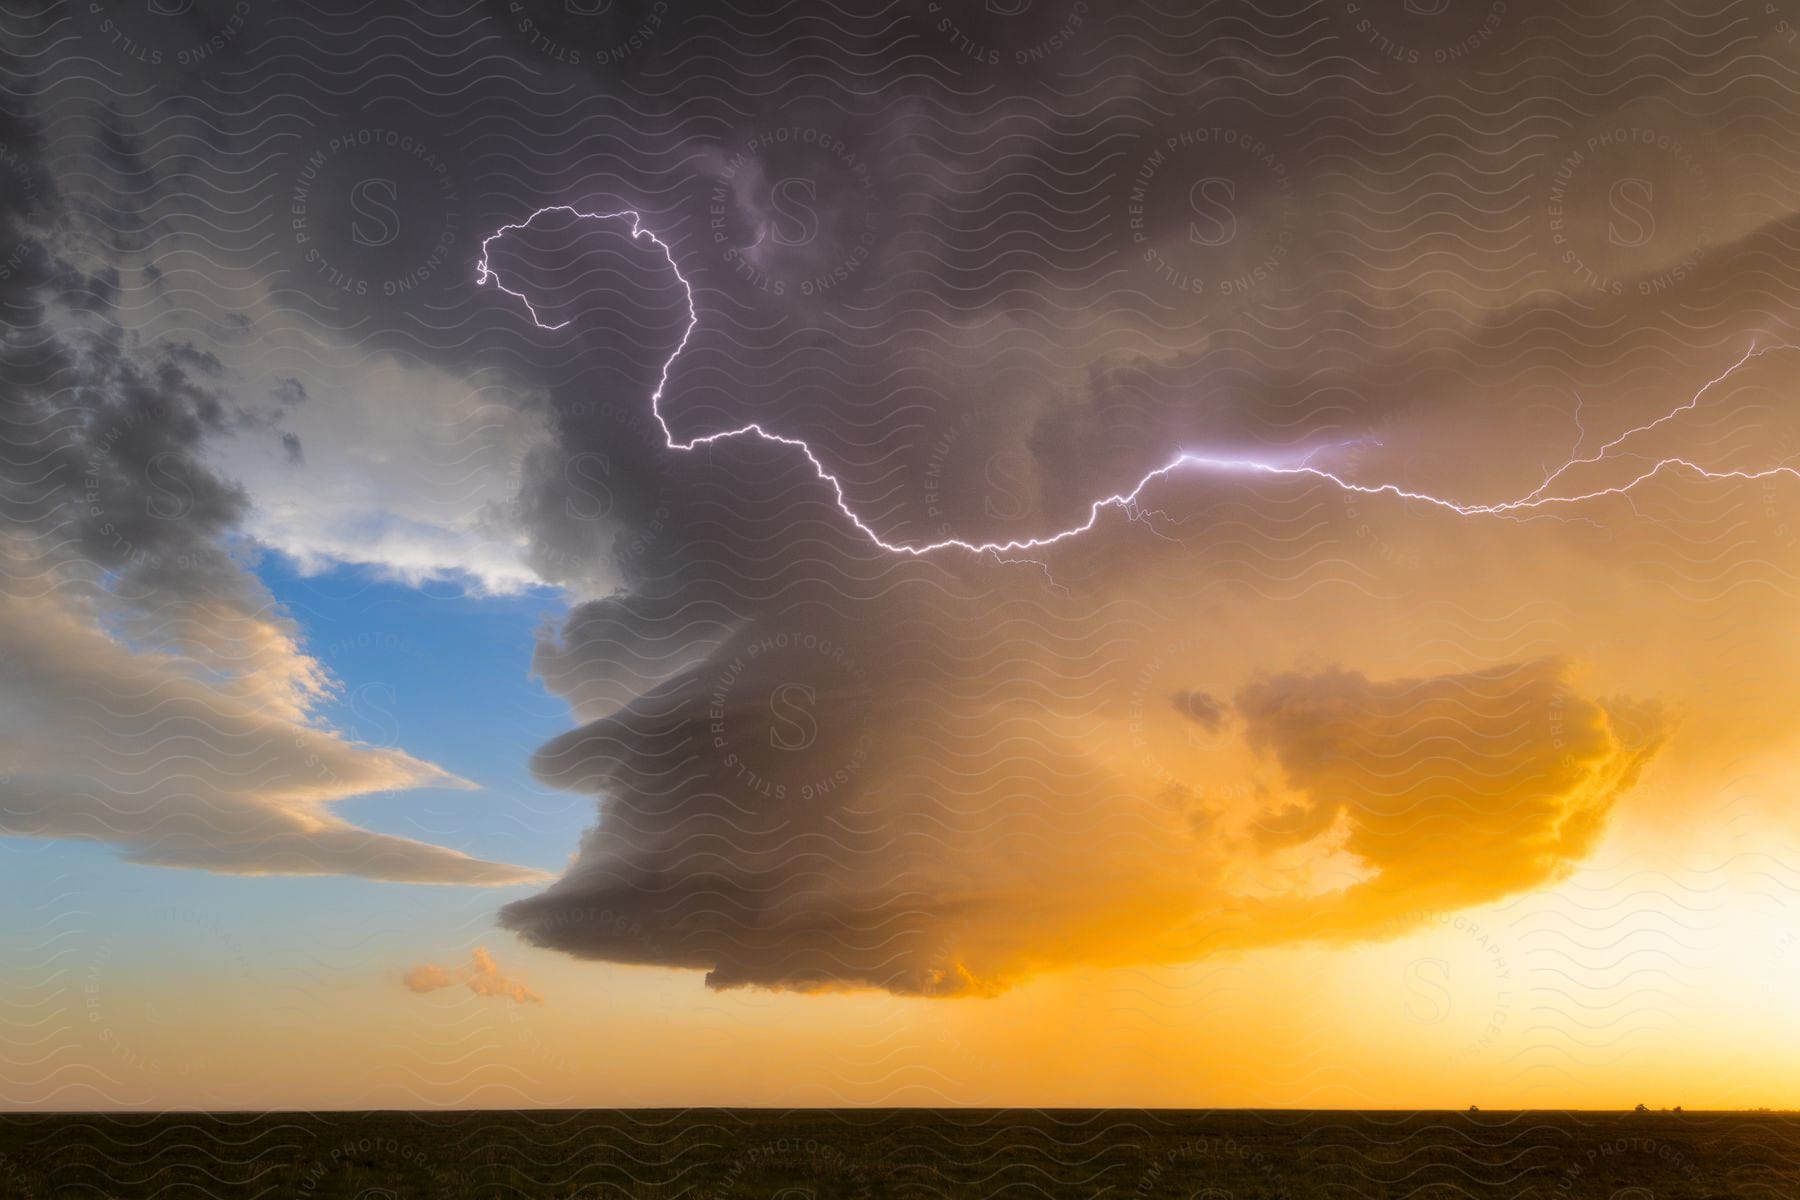 A low precipitation supercell spins southwest of dalhart texas at sunset